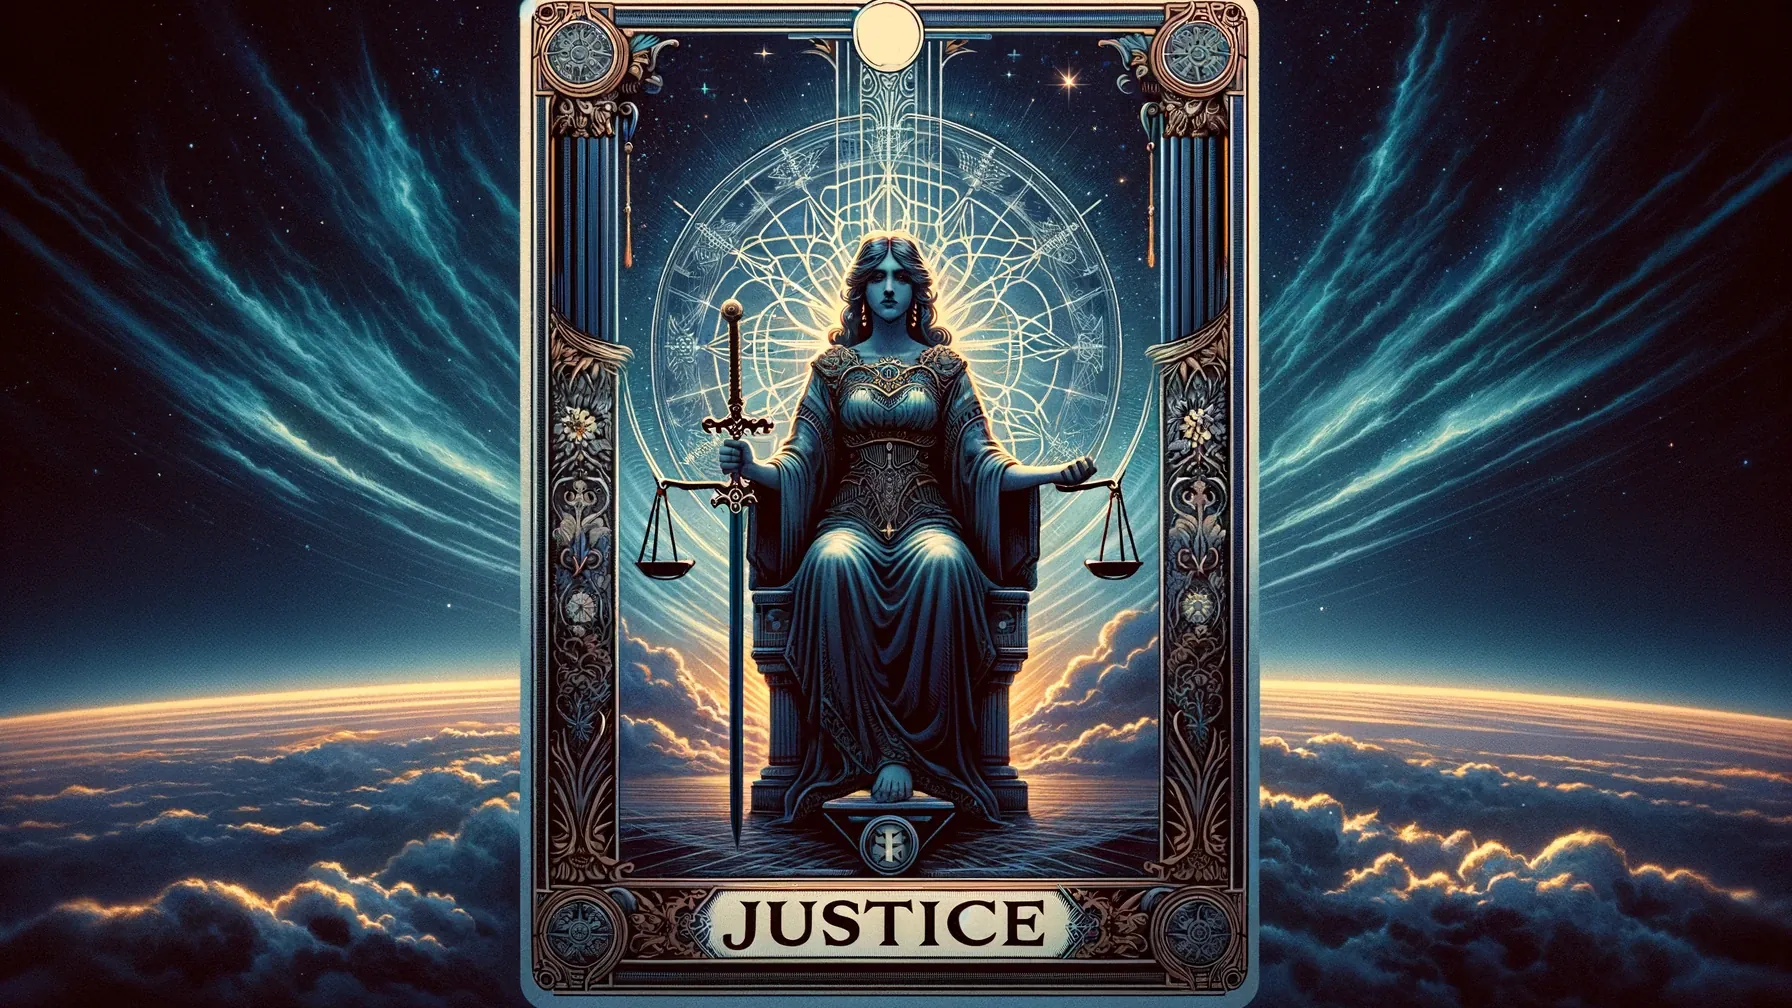 Unraveling the Justice Tarot Card's Wisdom: Seeking Equilibrium